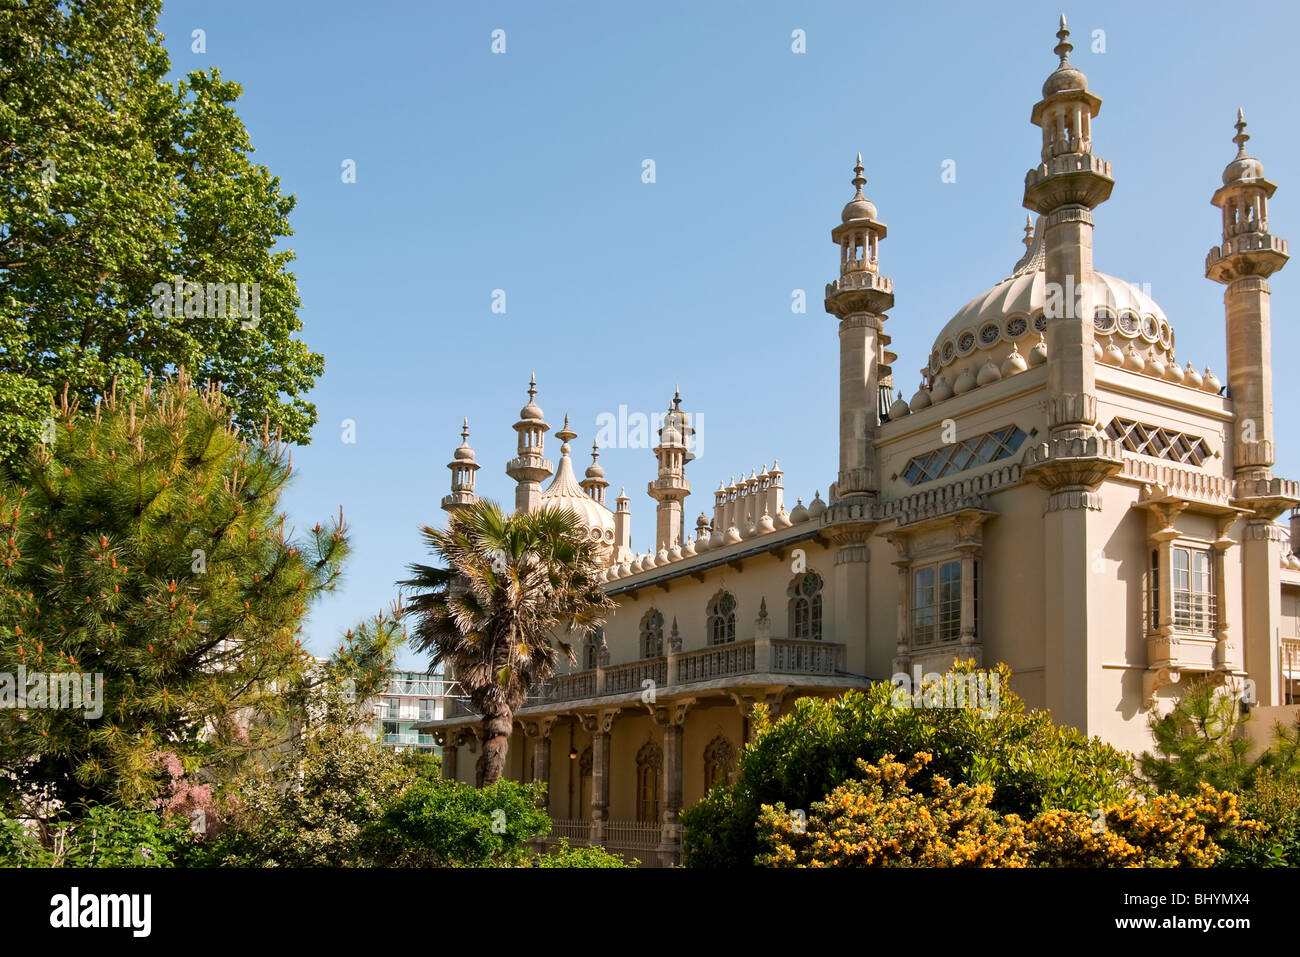 Historical Royal Pavilion of Brighton in East Sussex, South England. Stock Photo